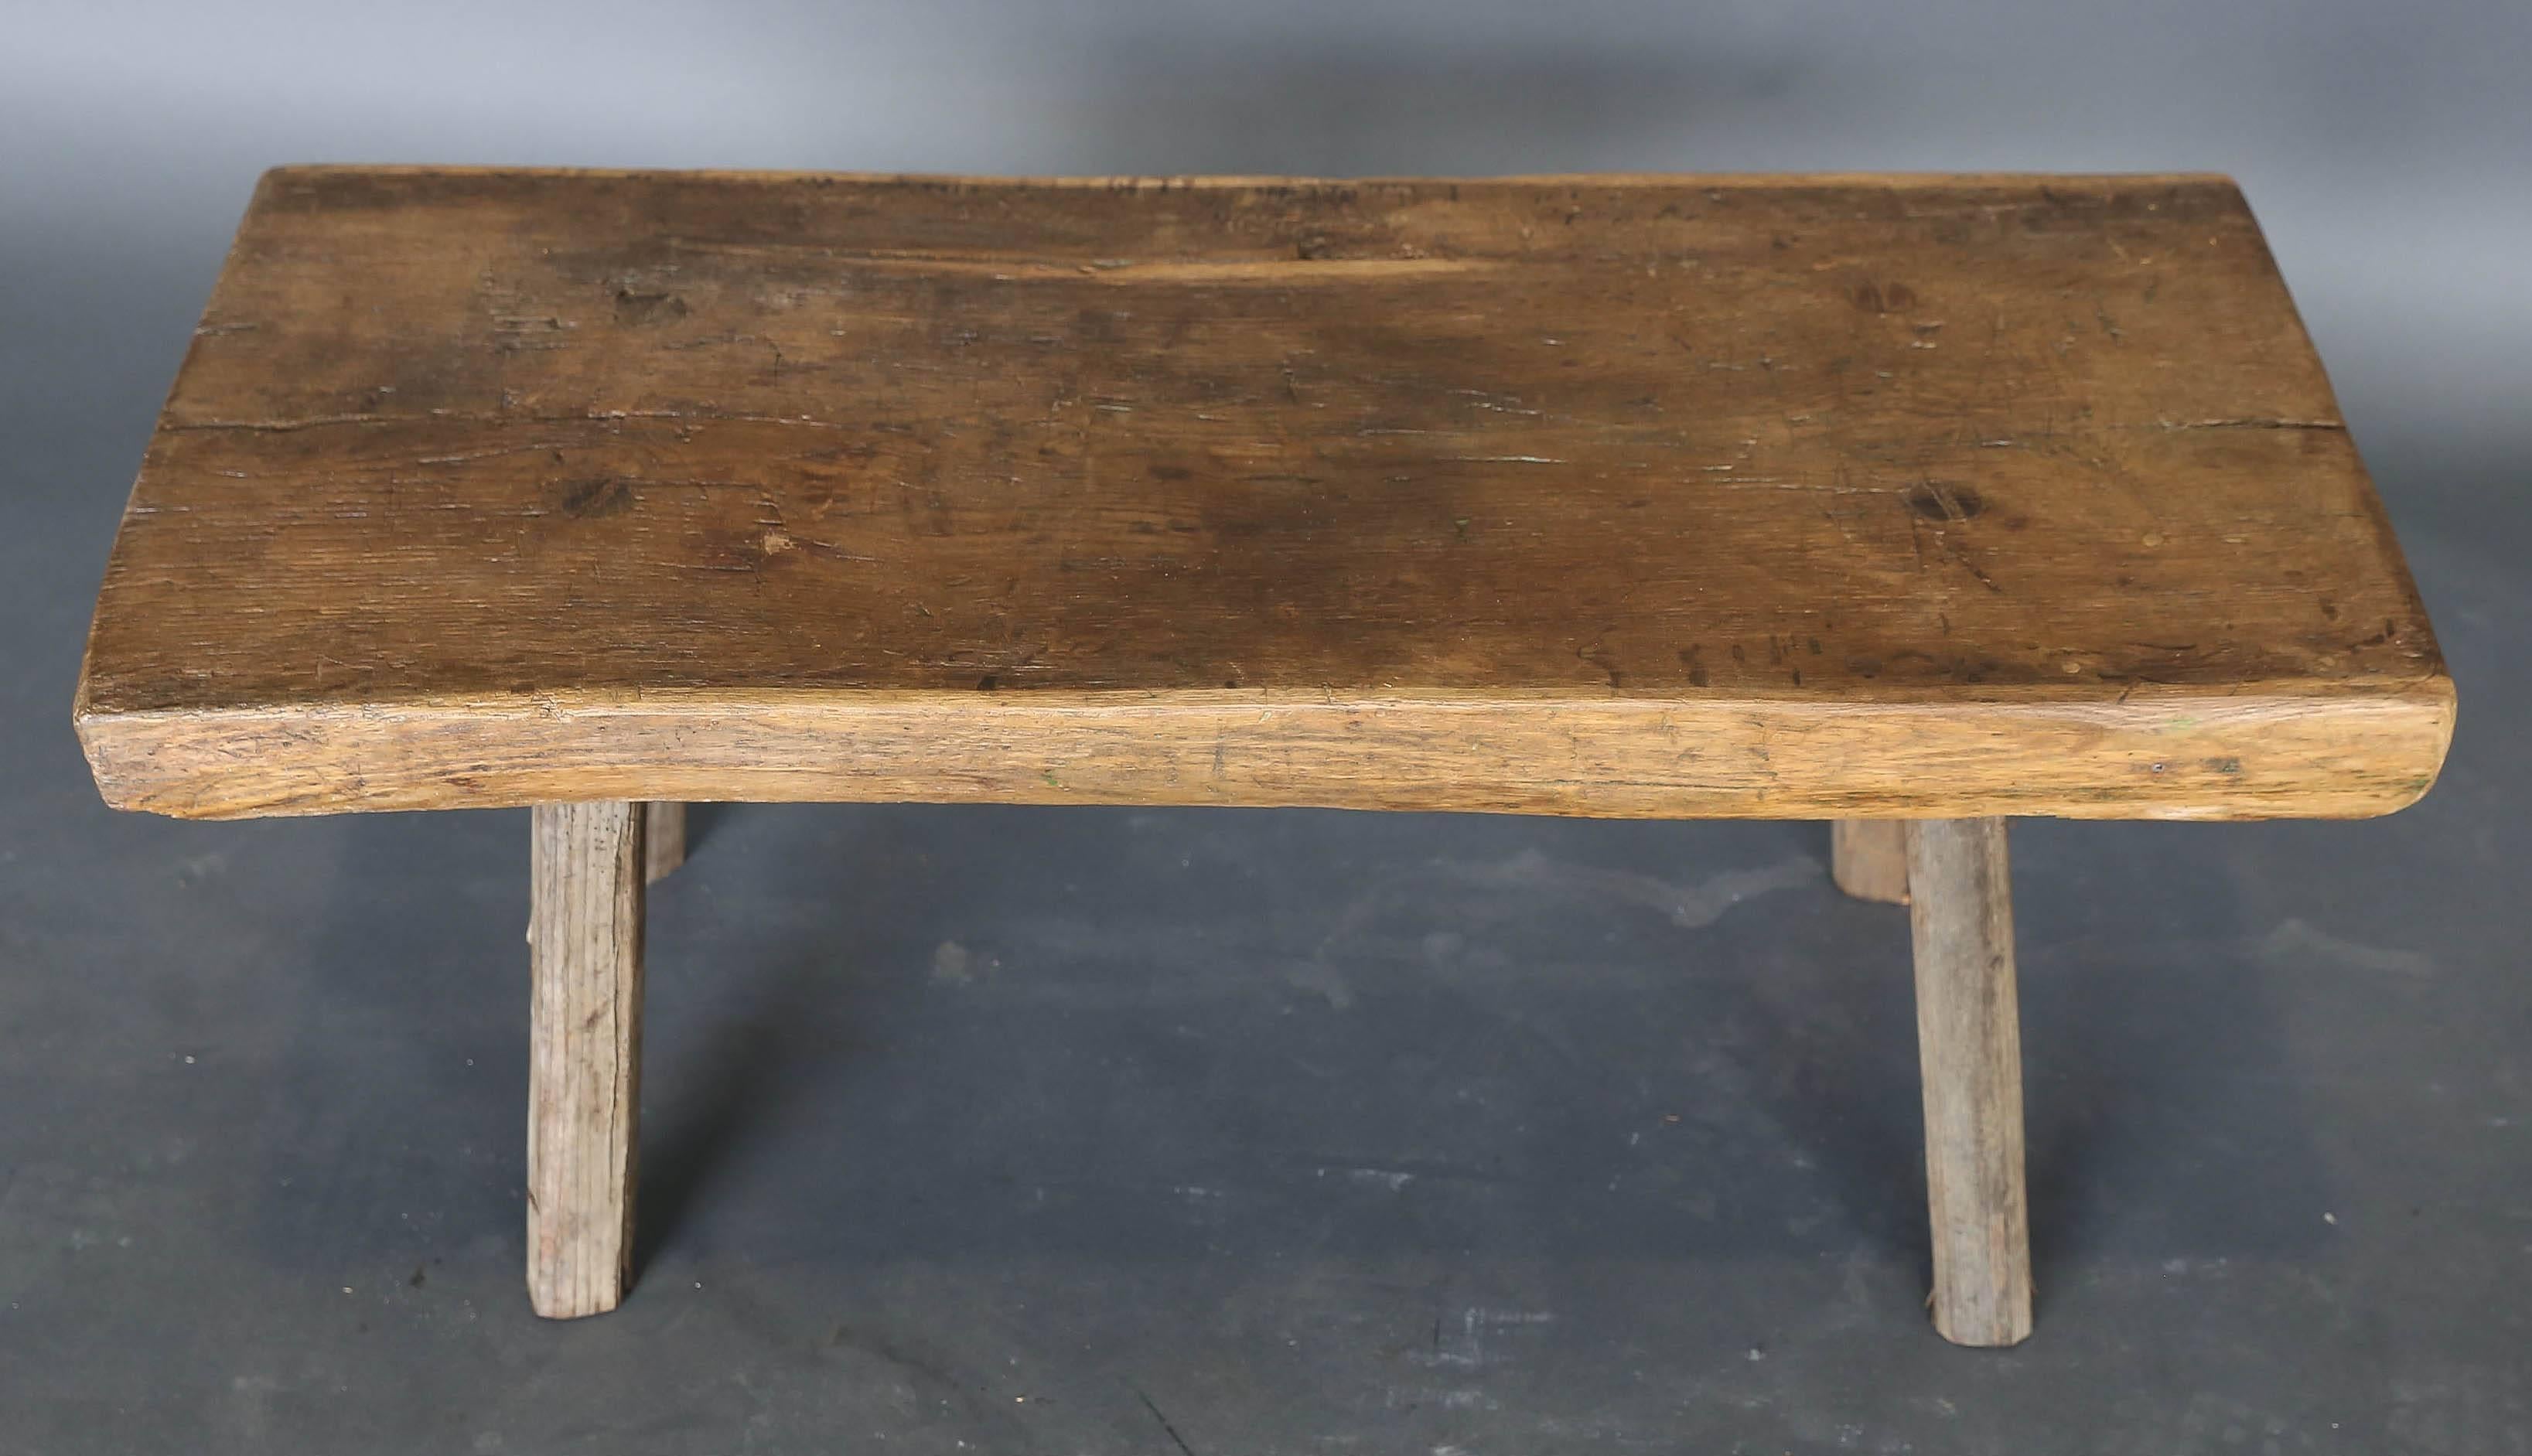 English Antique 19th Century Elm Table or Bench with Thick Top Slab